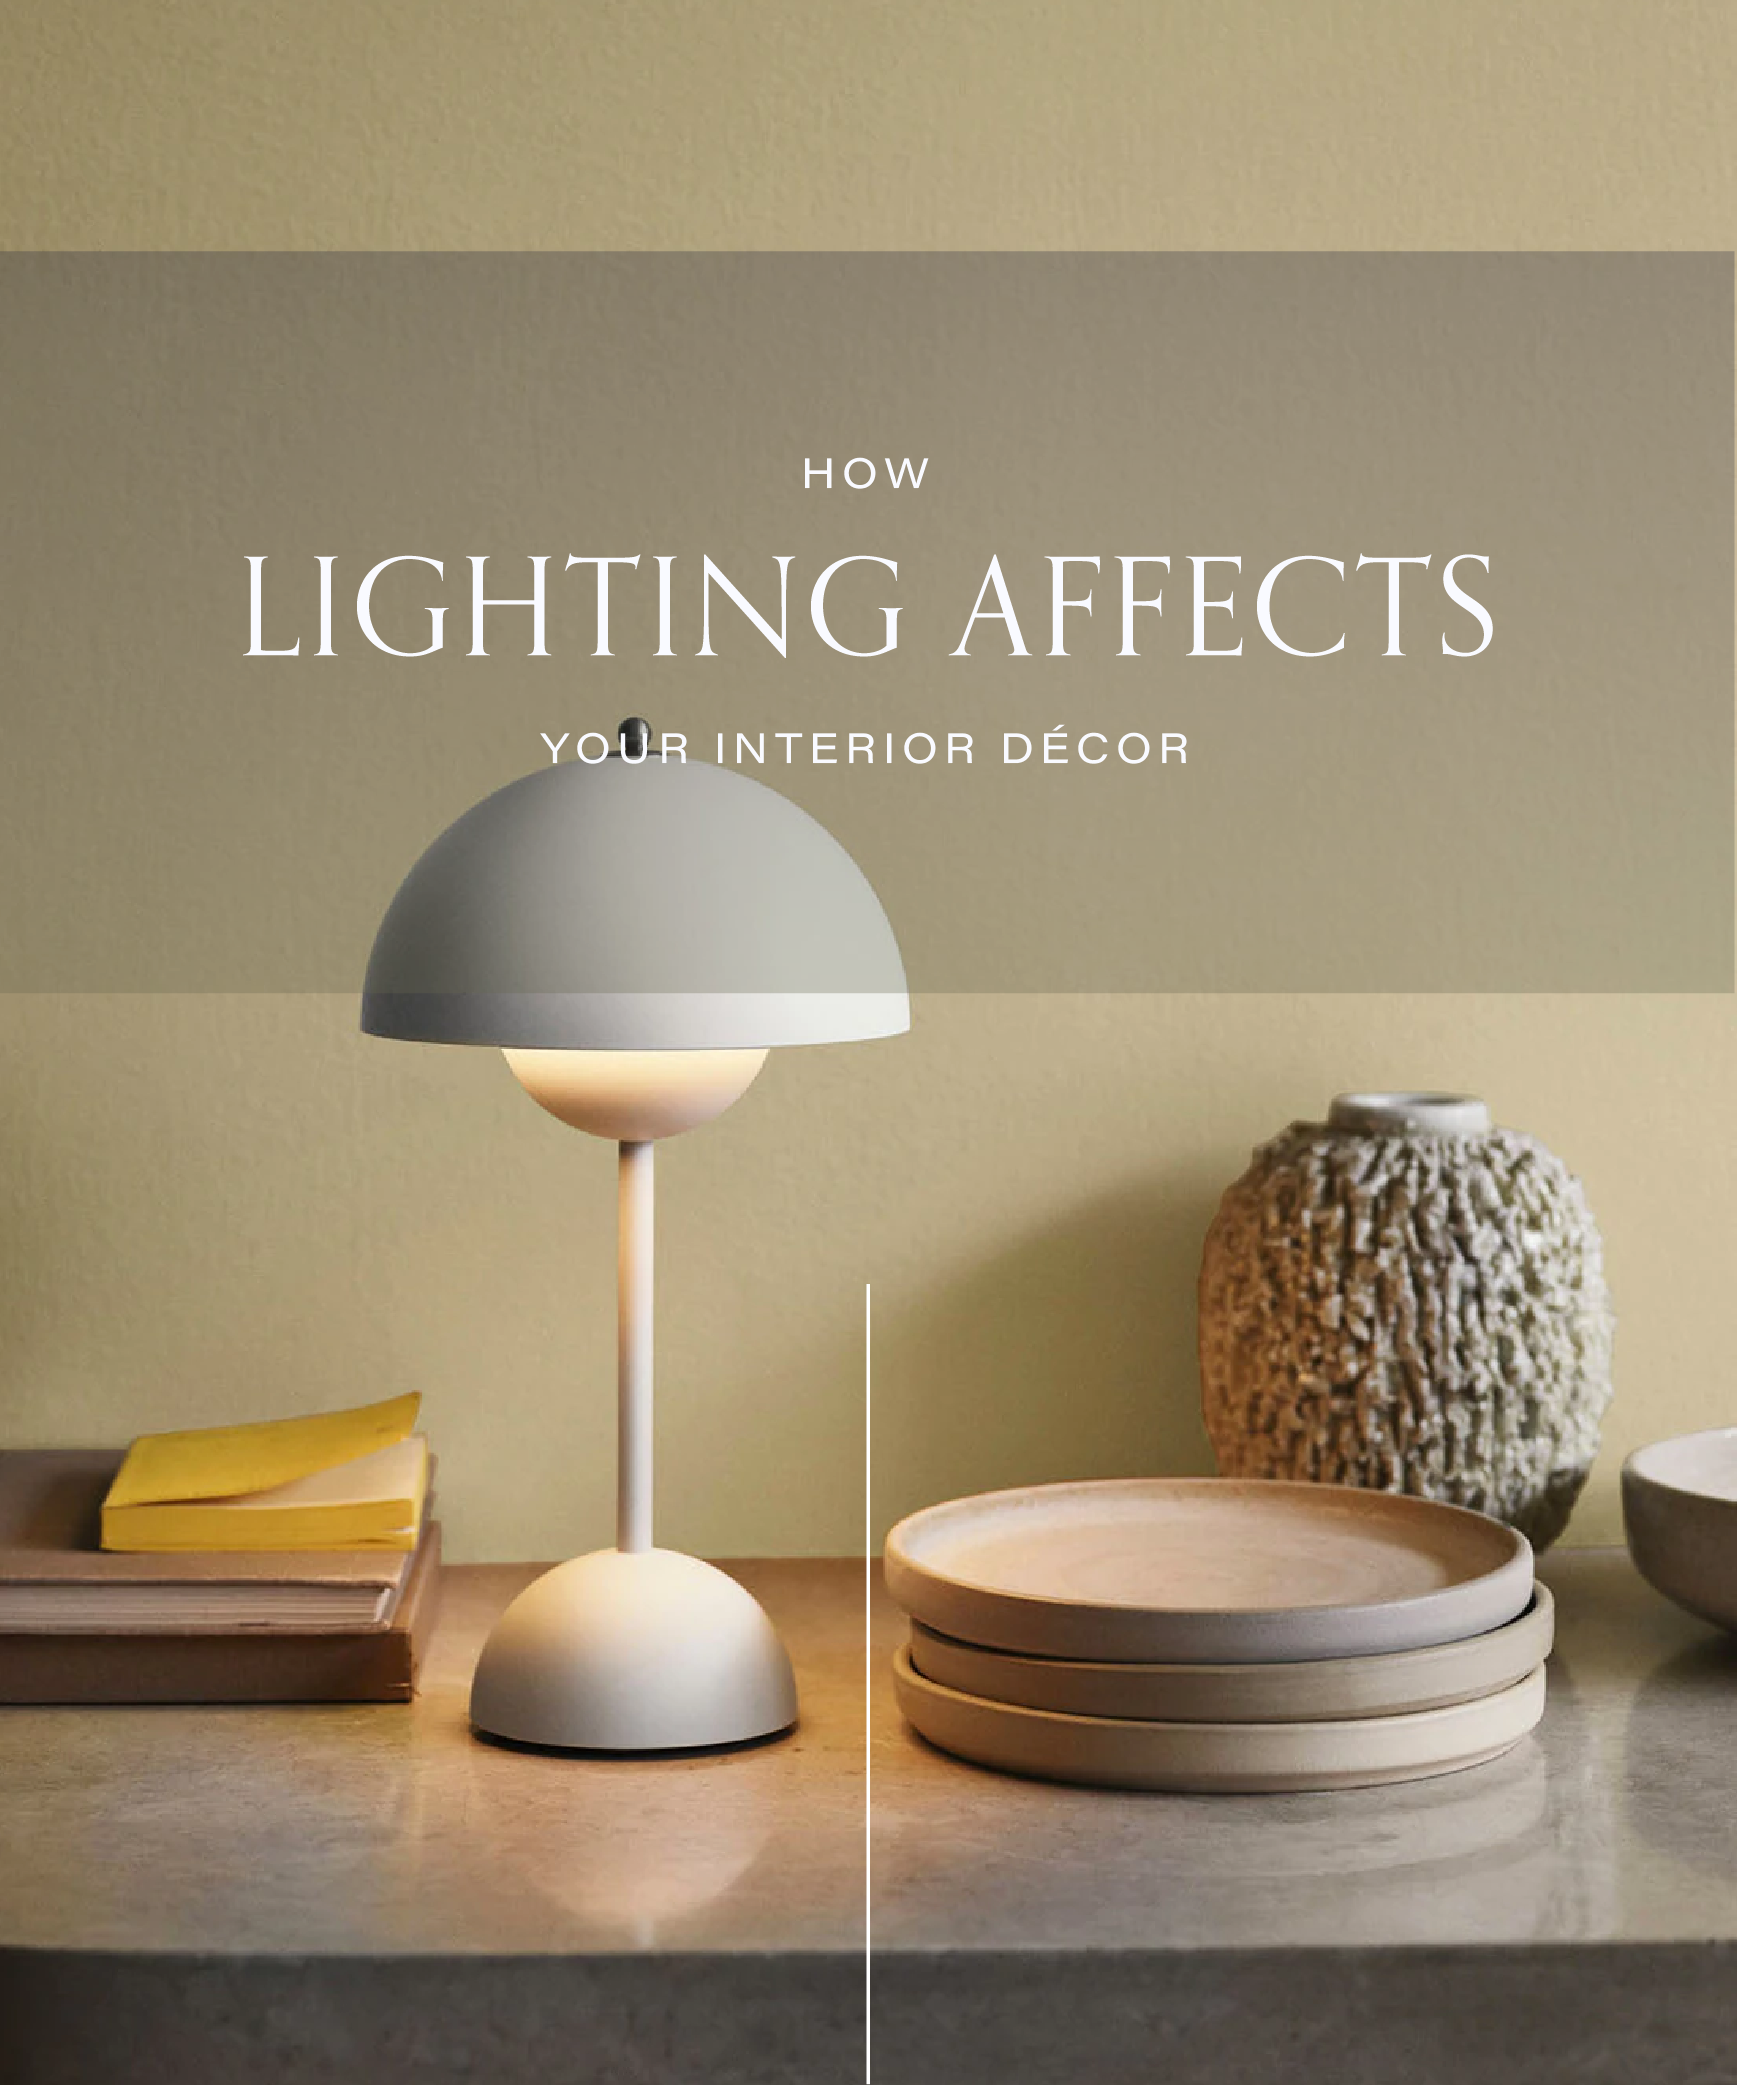 How Lighting Affects Your Interior Décor